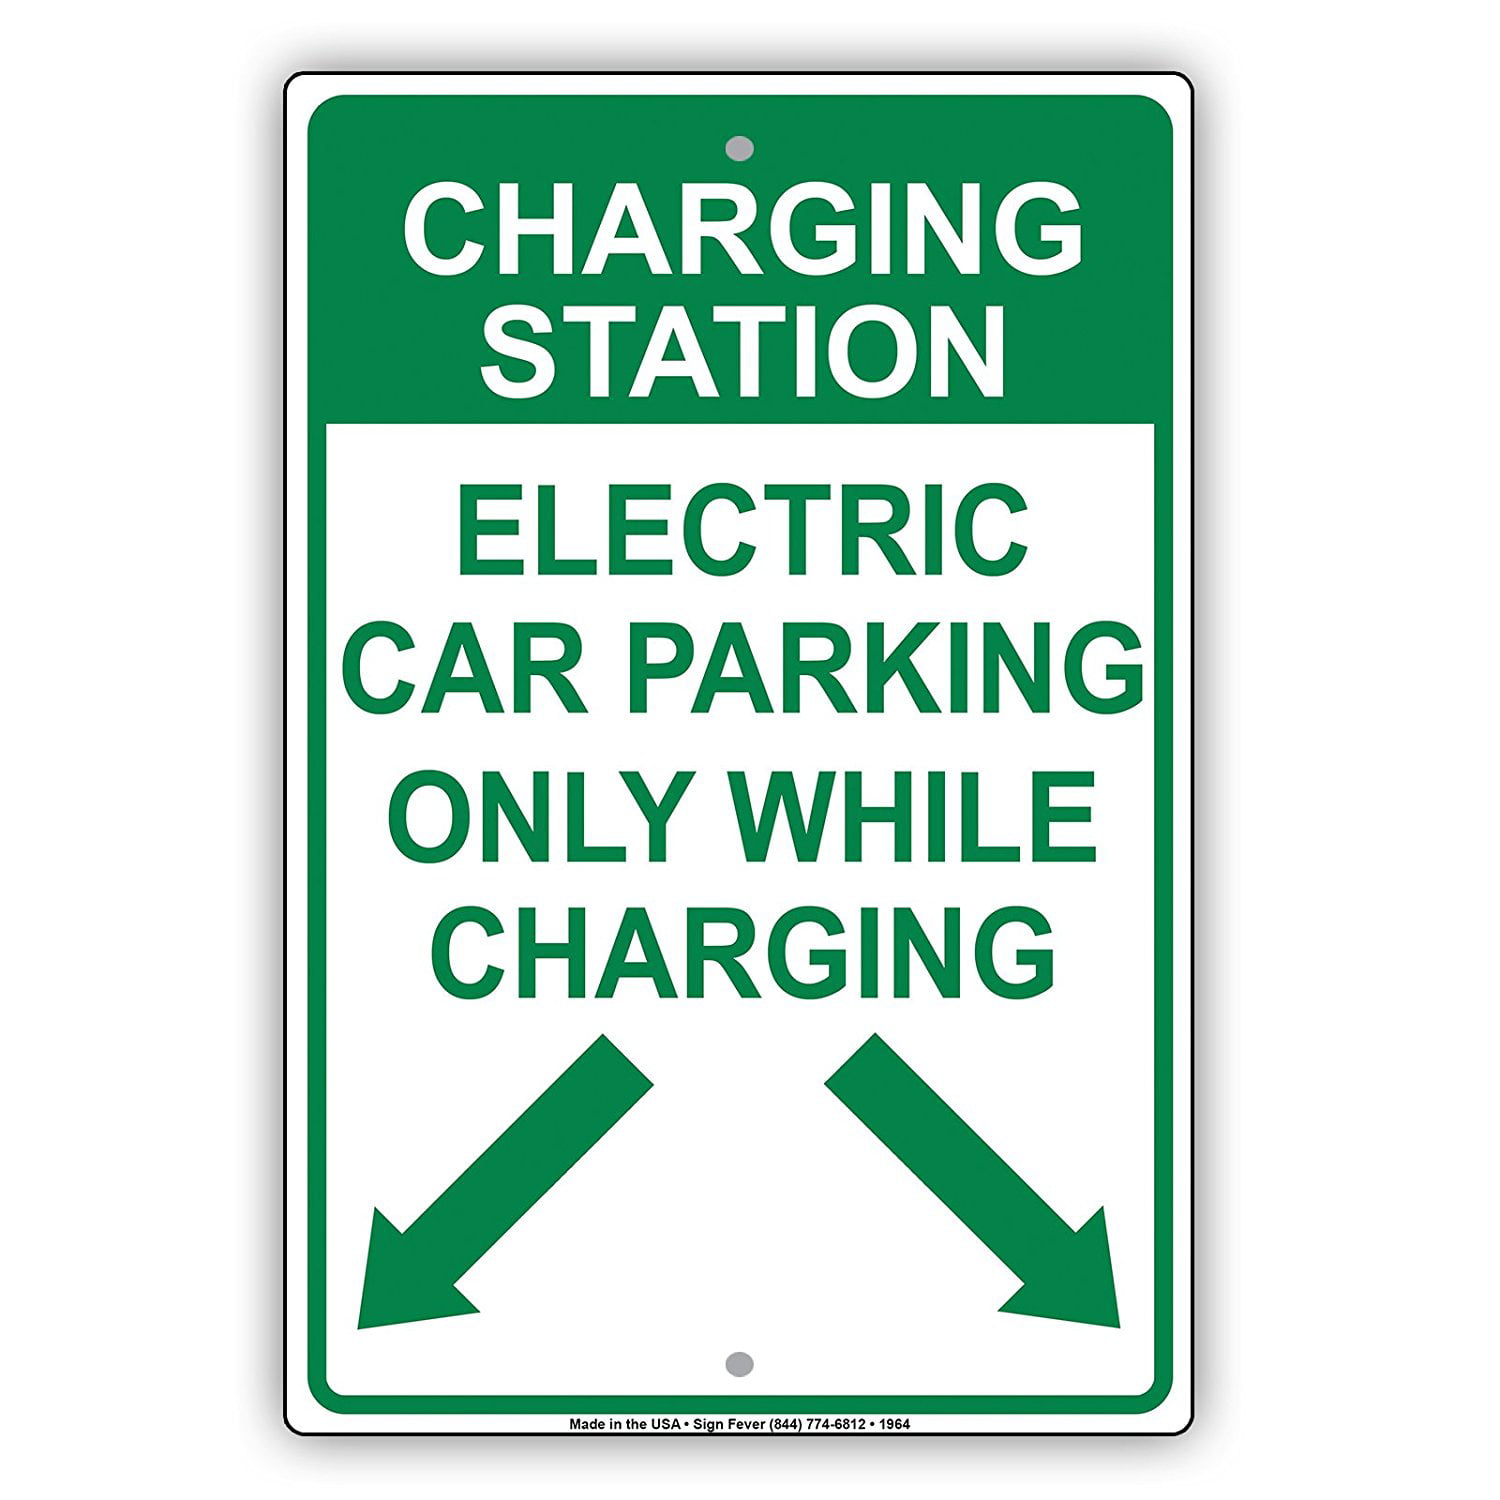 Charging Station Electric Car Parking Only While Charging With Graphic